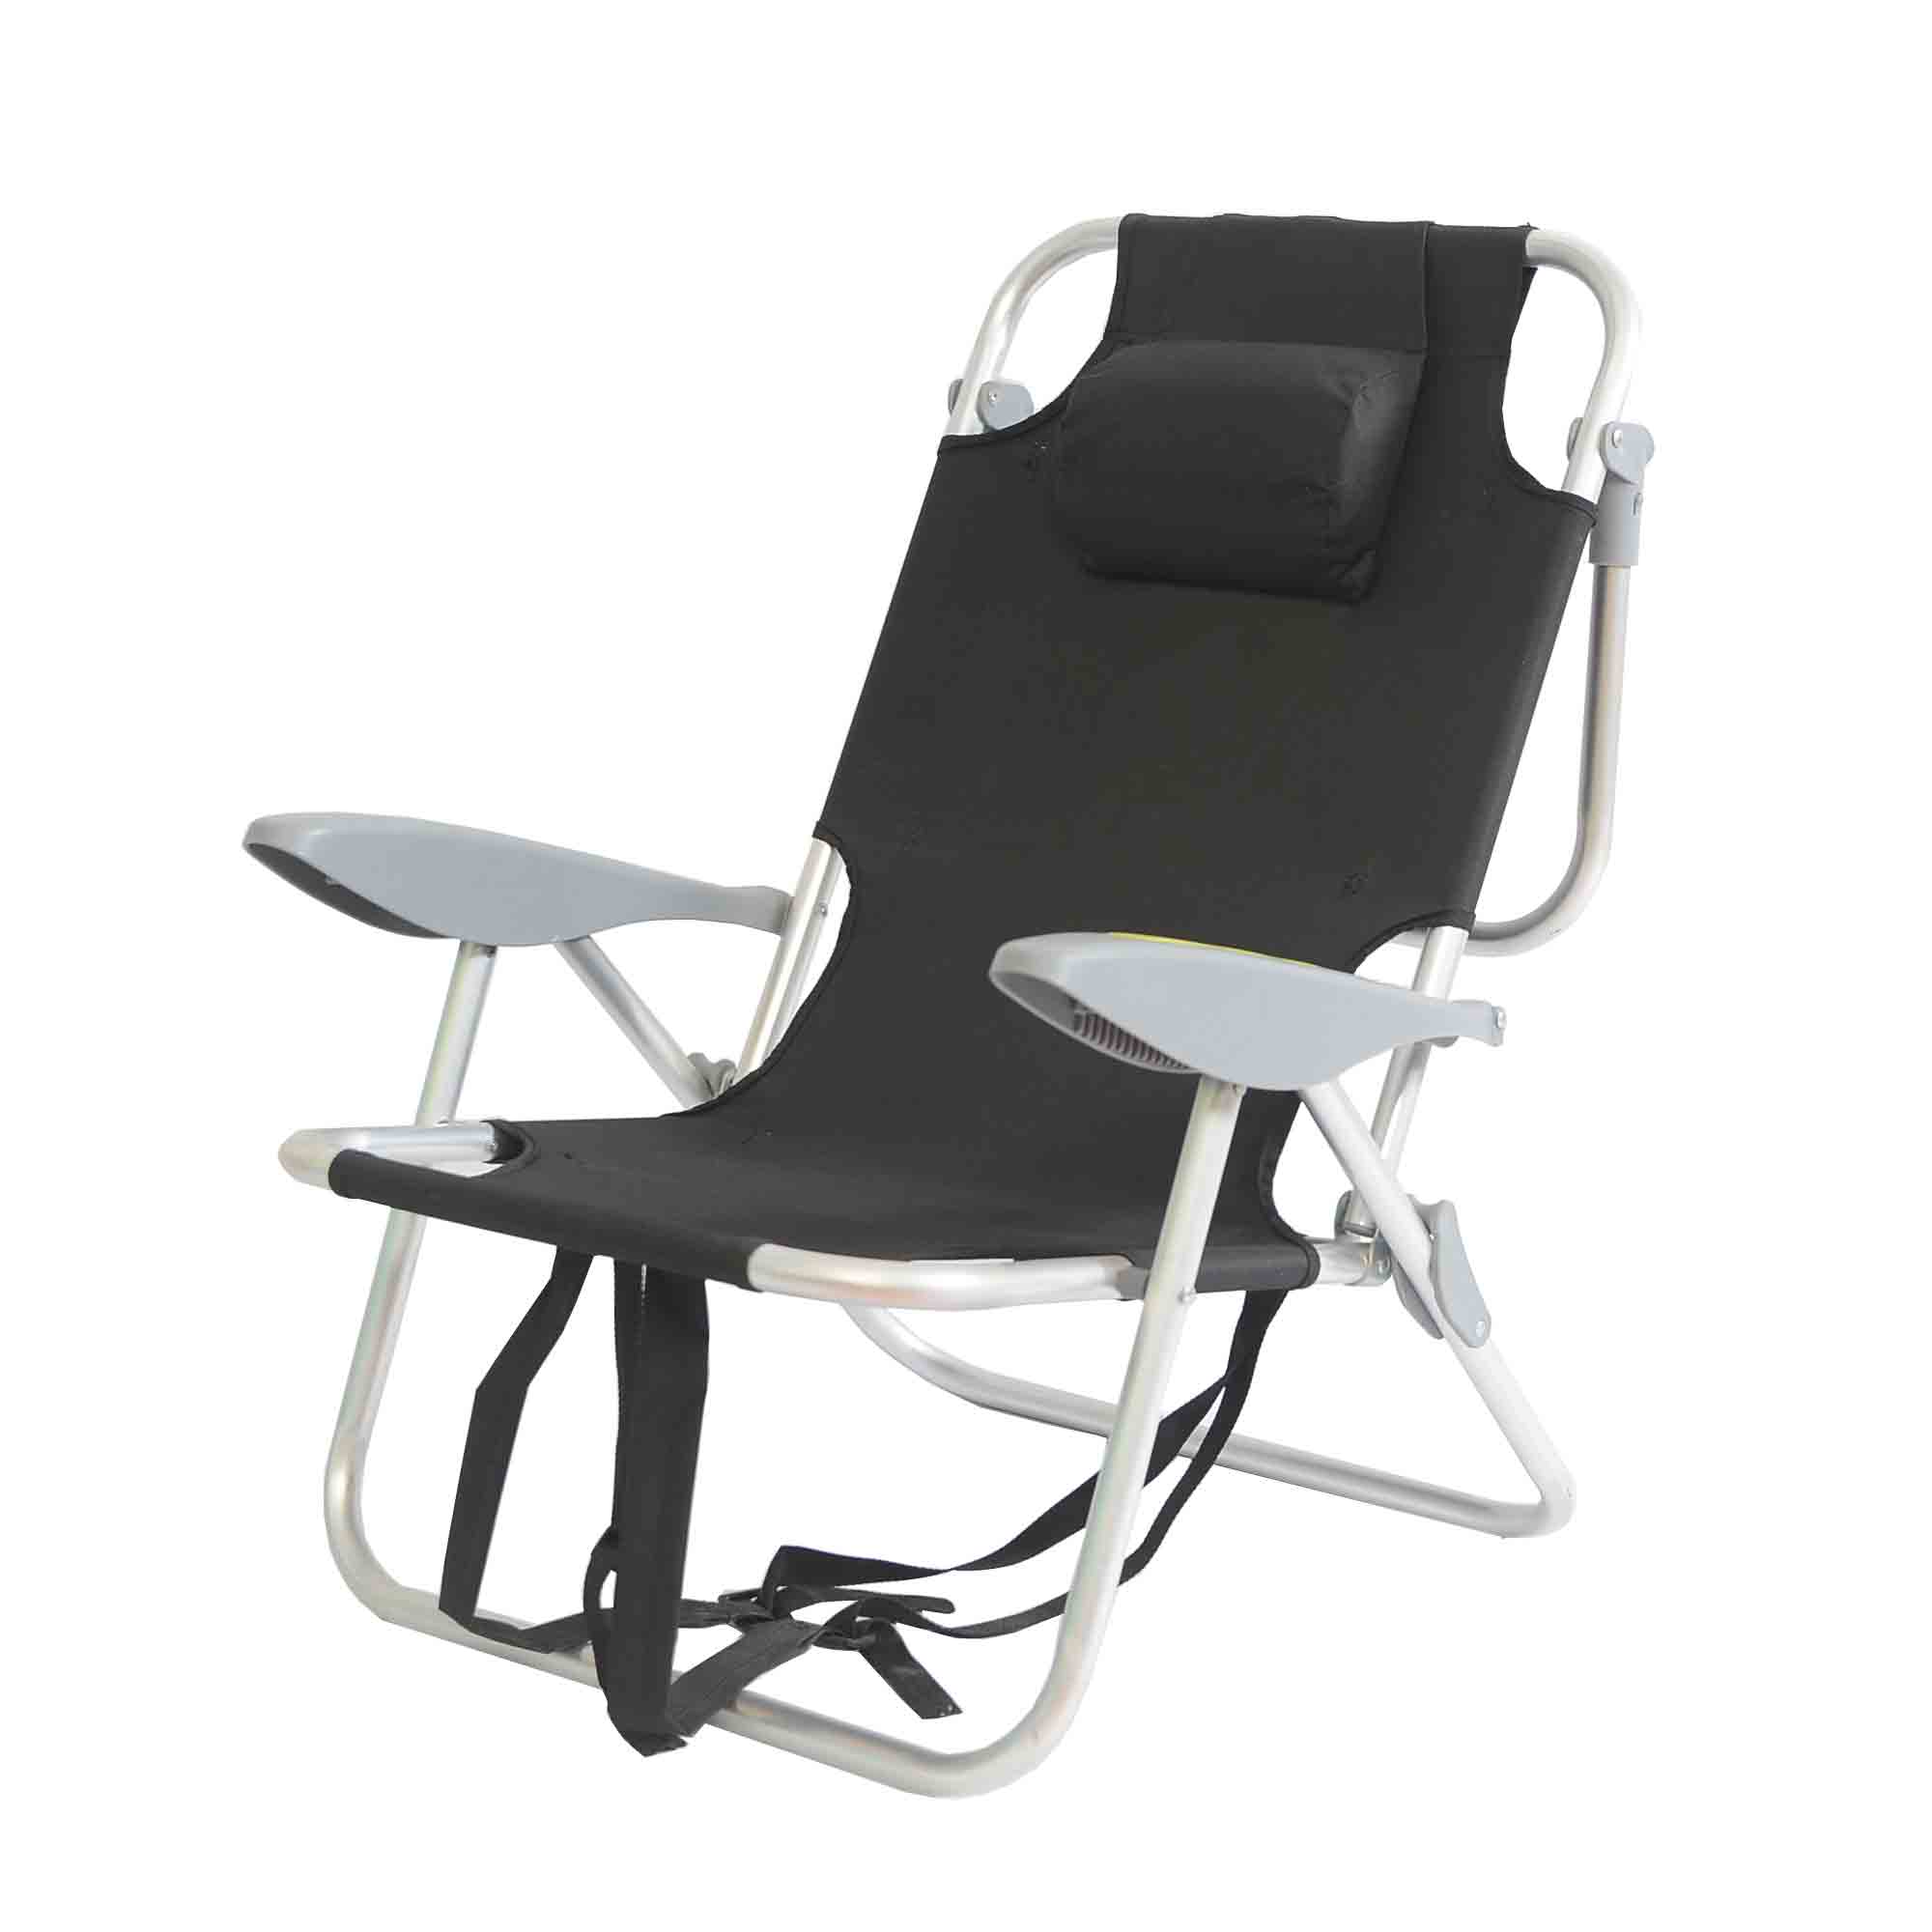 JJLXS-082 Aluminum camping folding chair Featured Image